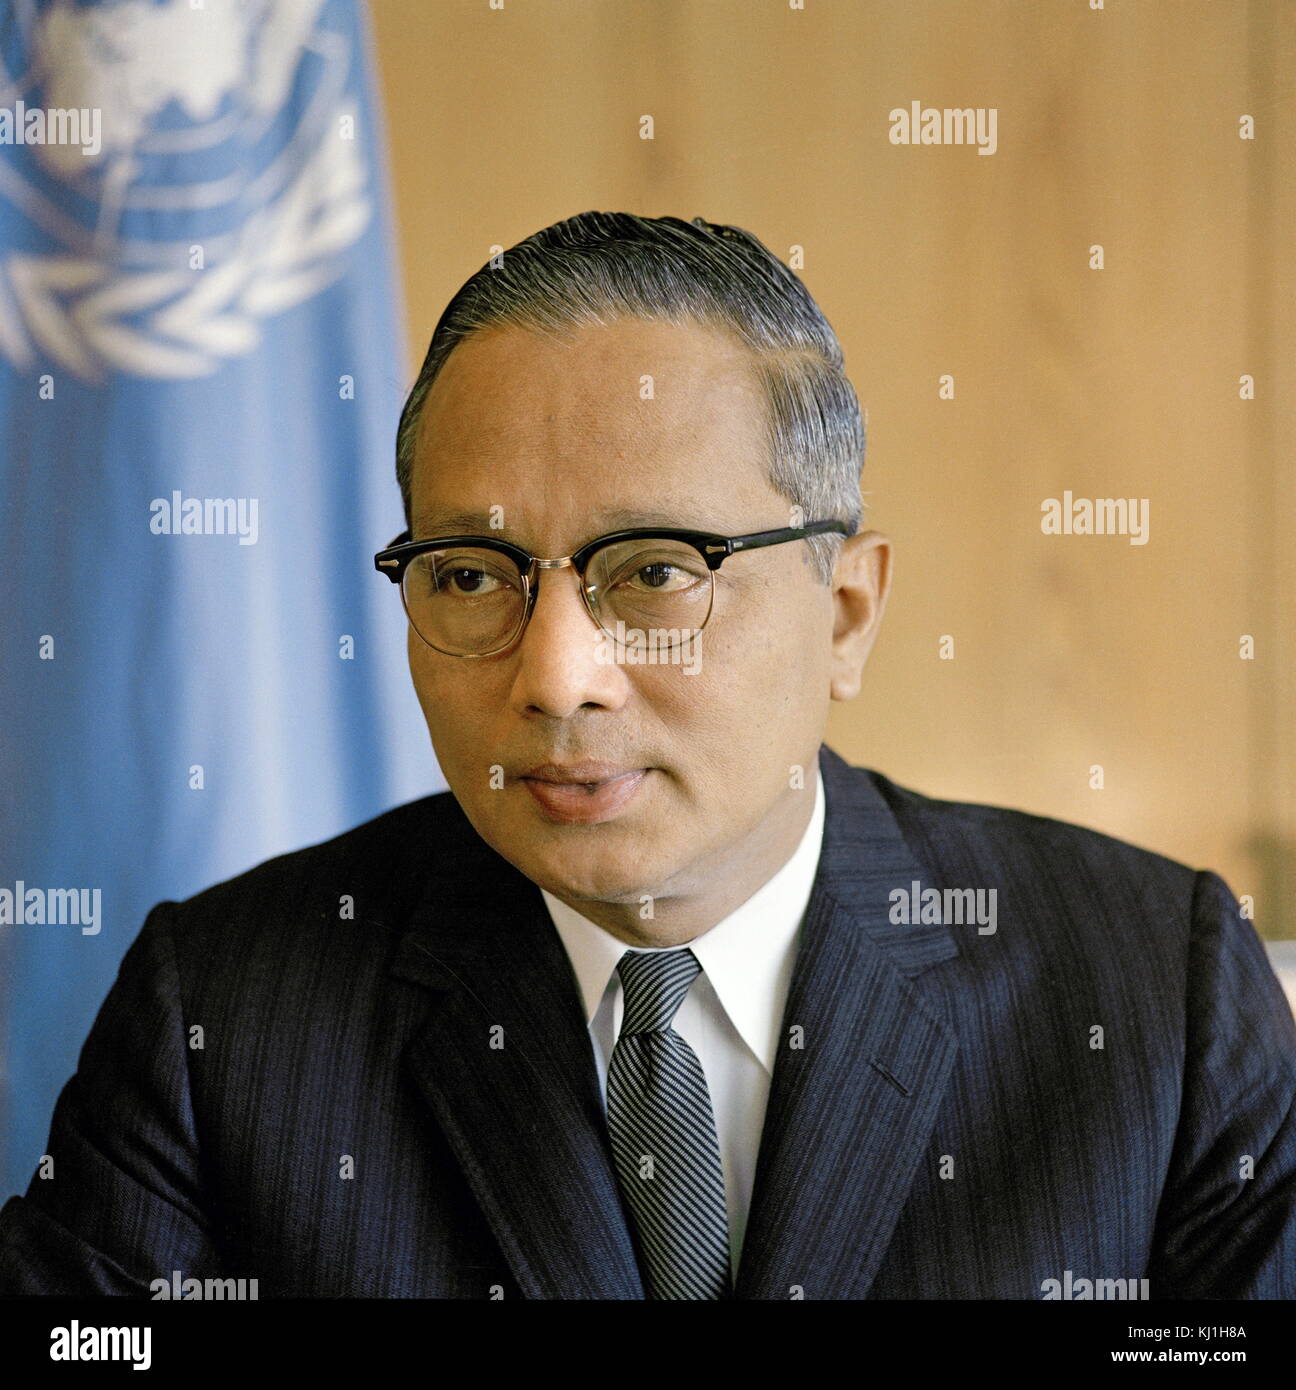 U Thant (1909 – 1974), a Burmese diplomat and the third Secretary-General of the United Nations from 1961 to 1971, the first non-European to hold the position. Stock Photo